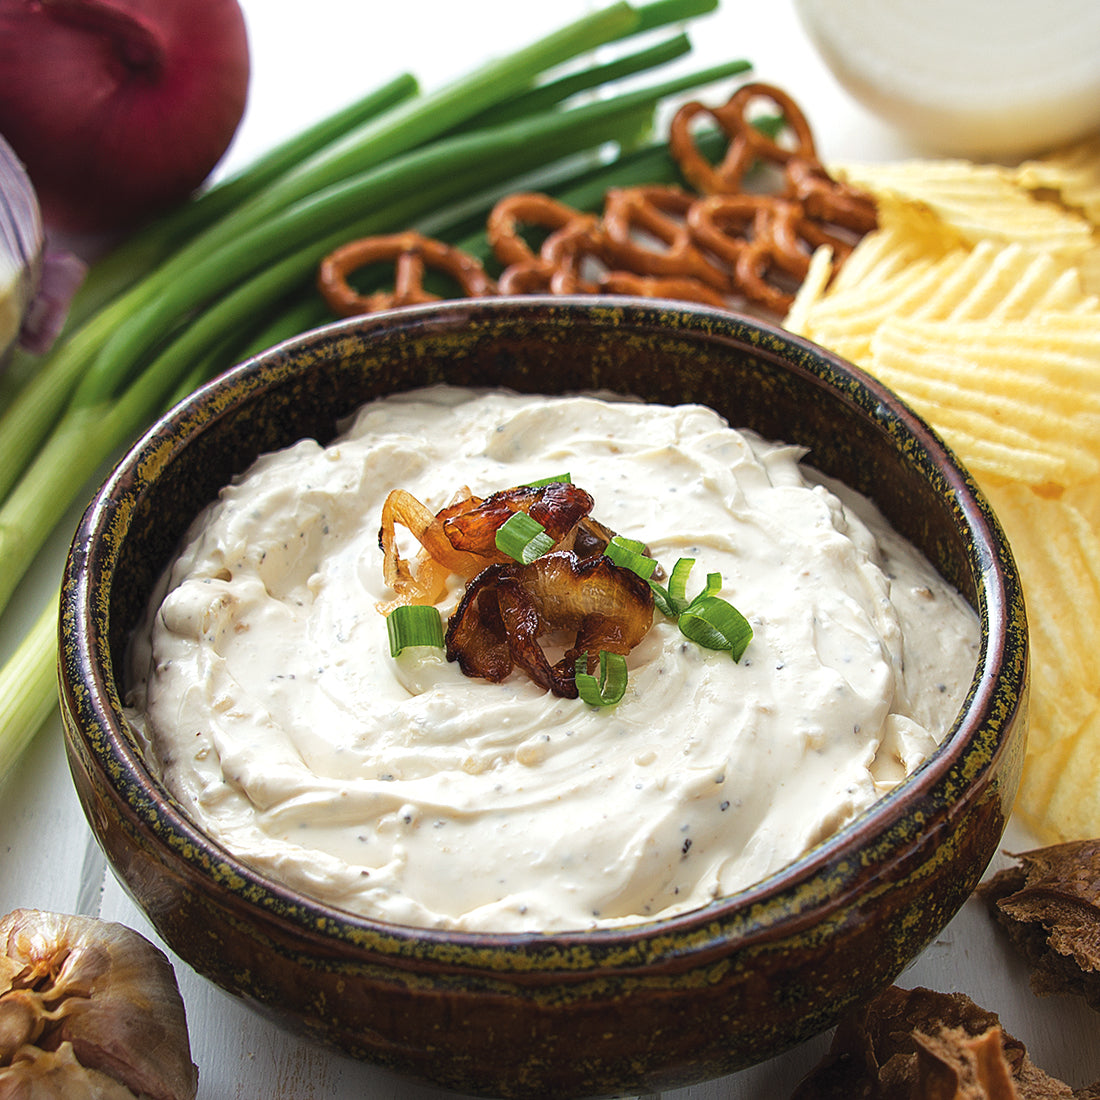 A bowl of Roasted Garlic & Onion Dip next to chips, pretzels. and green onions